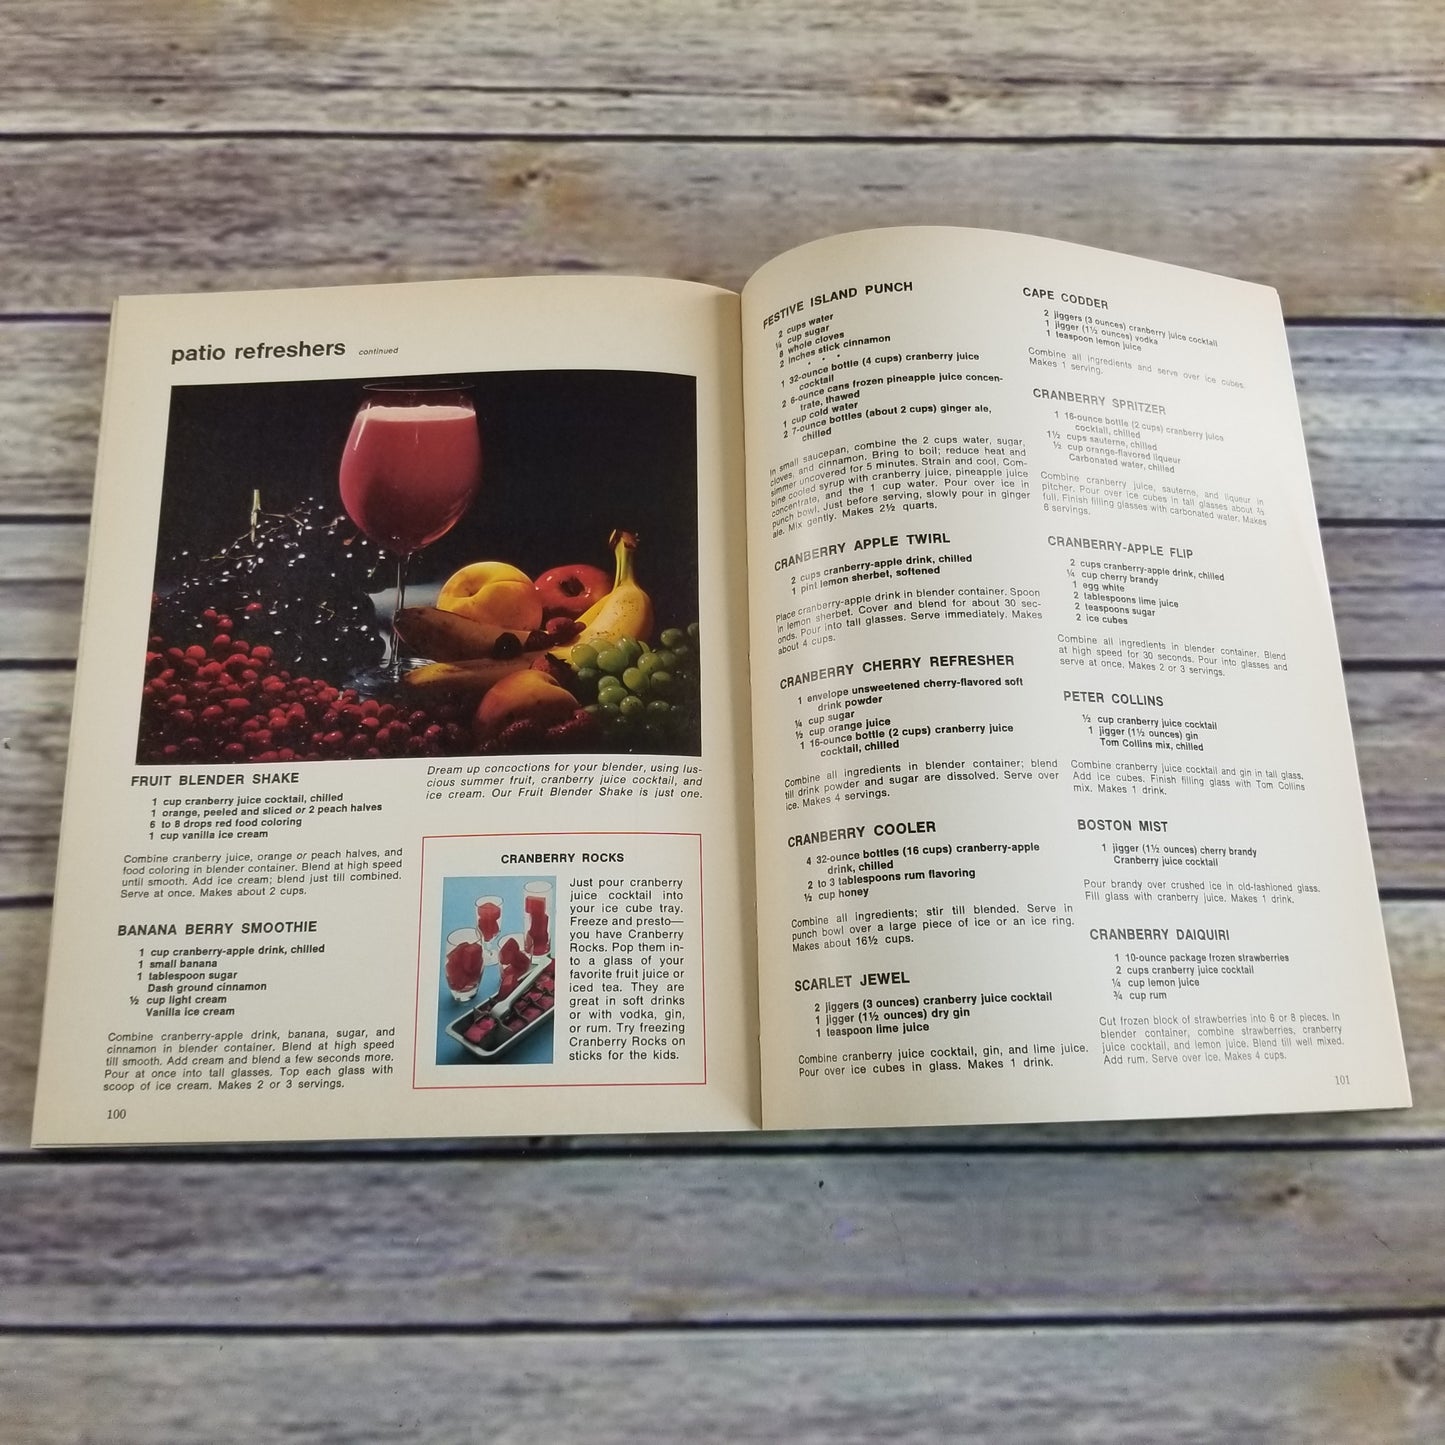 Vintage Cookbook Five Seasons Cranberry Book Better Homes and Gardens 275 Recipes 1971 Paperback Magazine